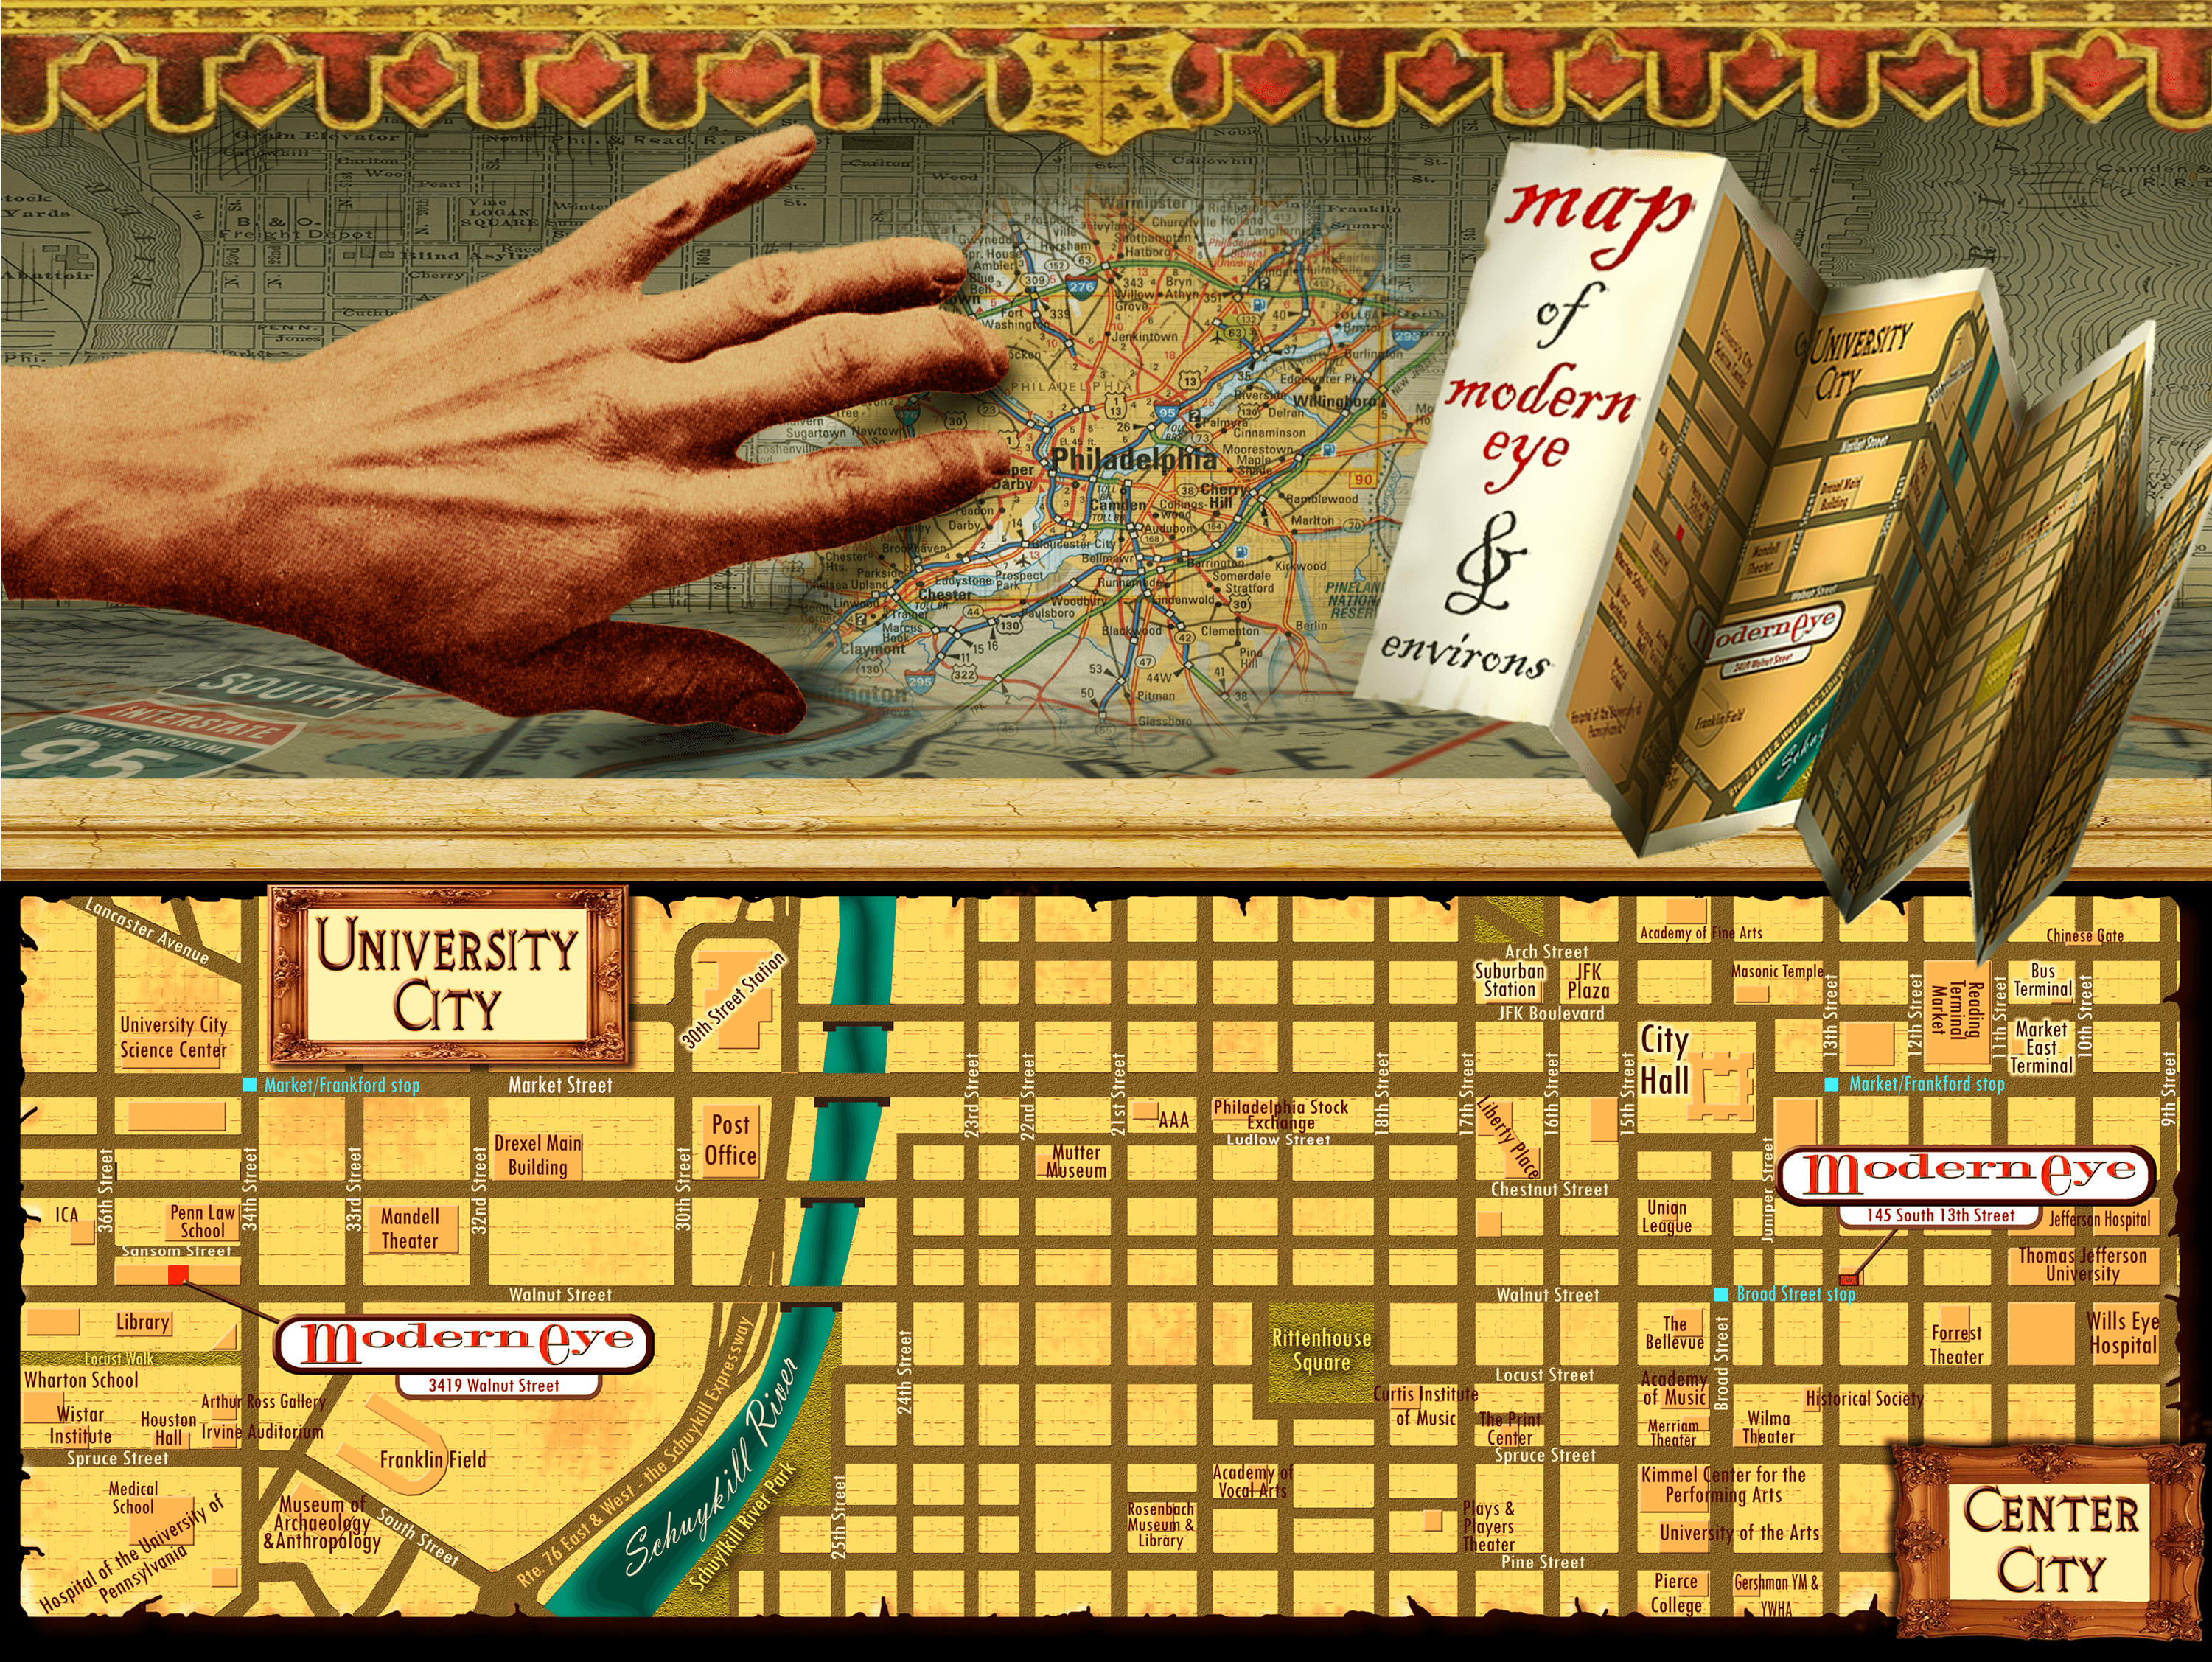 Illustration of a hand pointing at a map of Philadelphia, with a folded up map next to it. Below is a horizontal map of University City and Center City Philadelphia, marking the modern eye locations and environs.